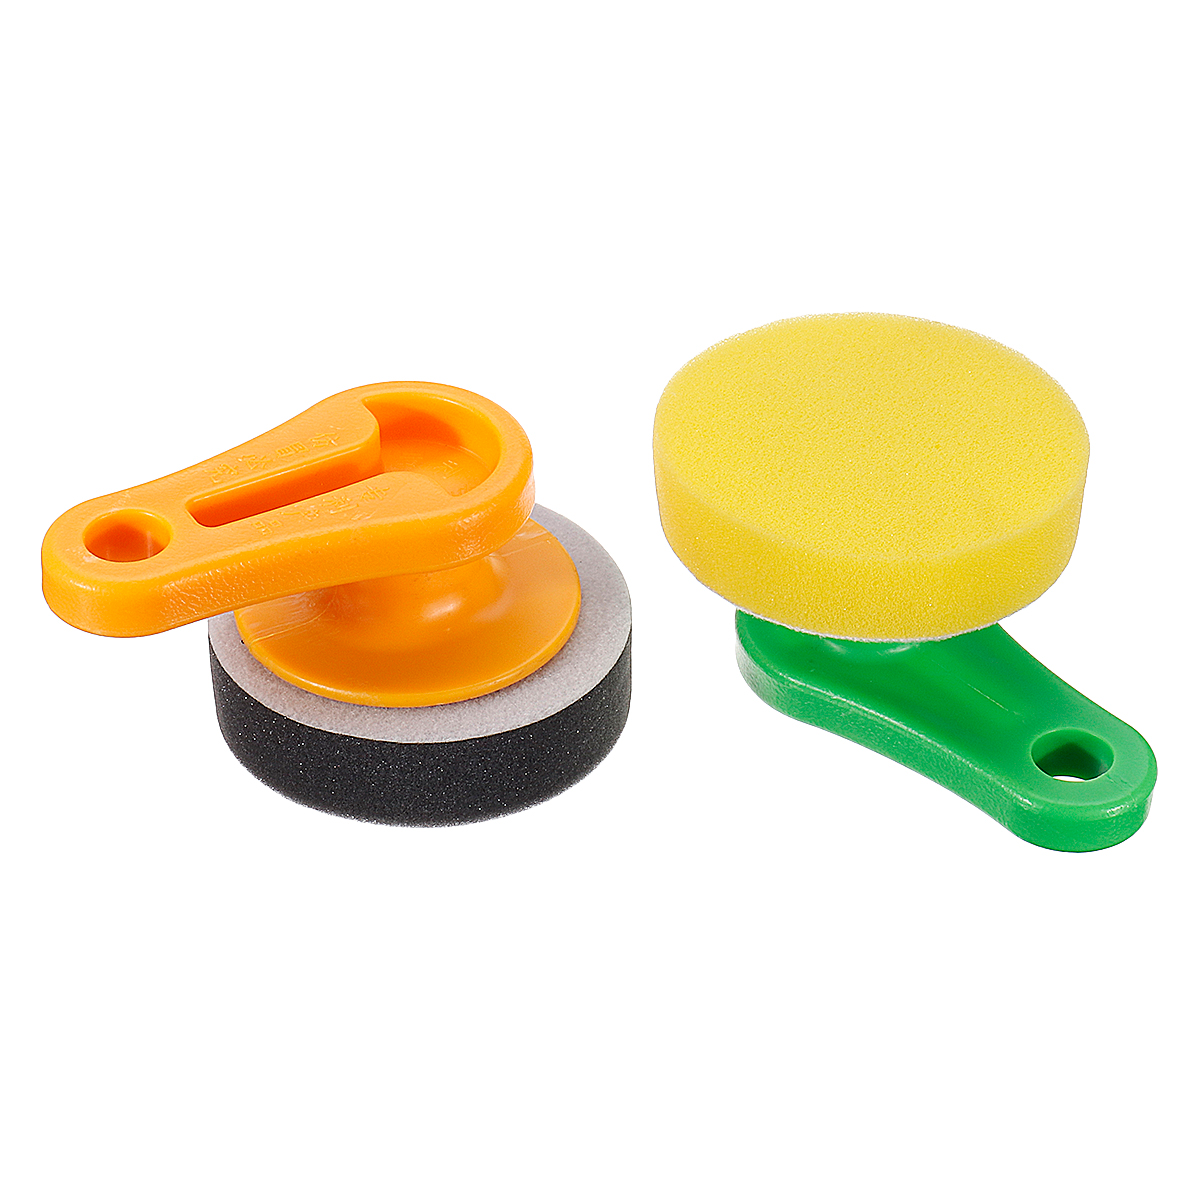 Car Waxing Cleaning Sponge Delicate Soft Plastic Handle round Waxer Car Maintenance Tools